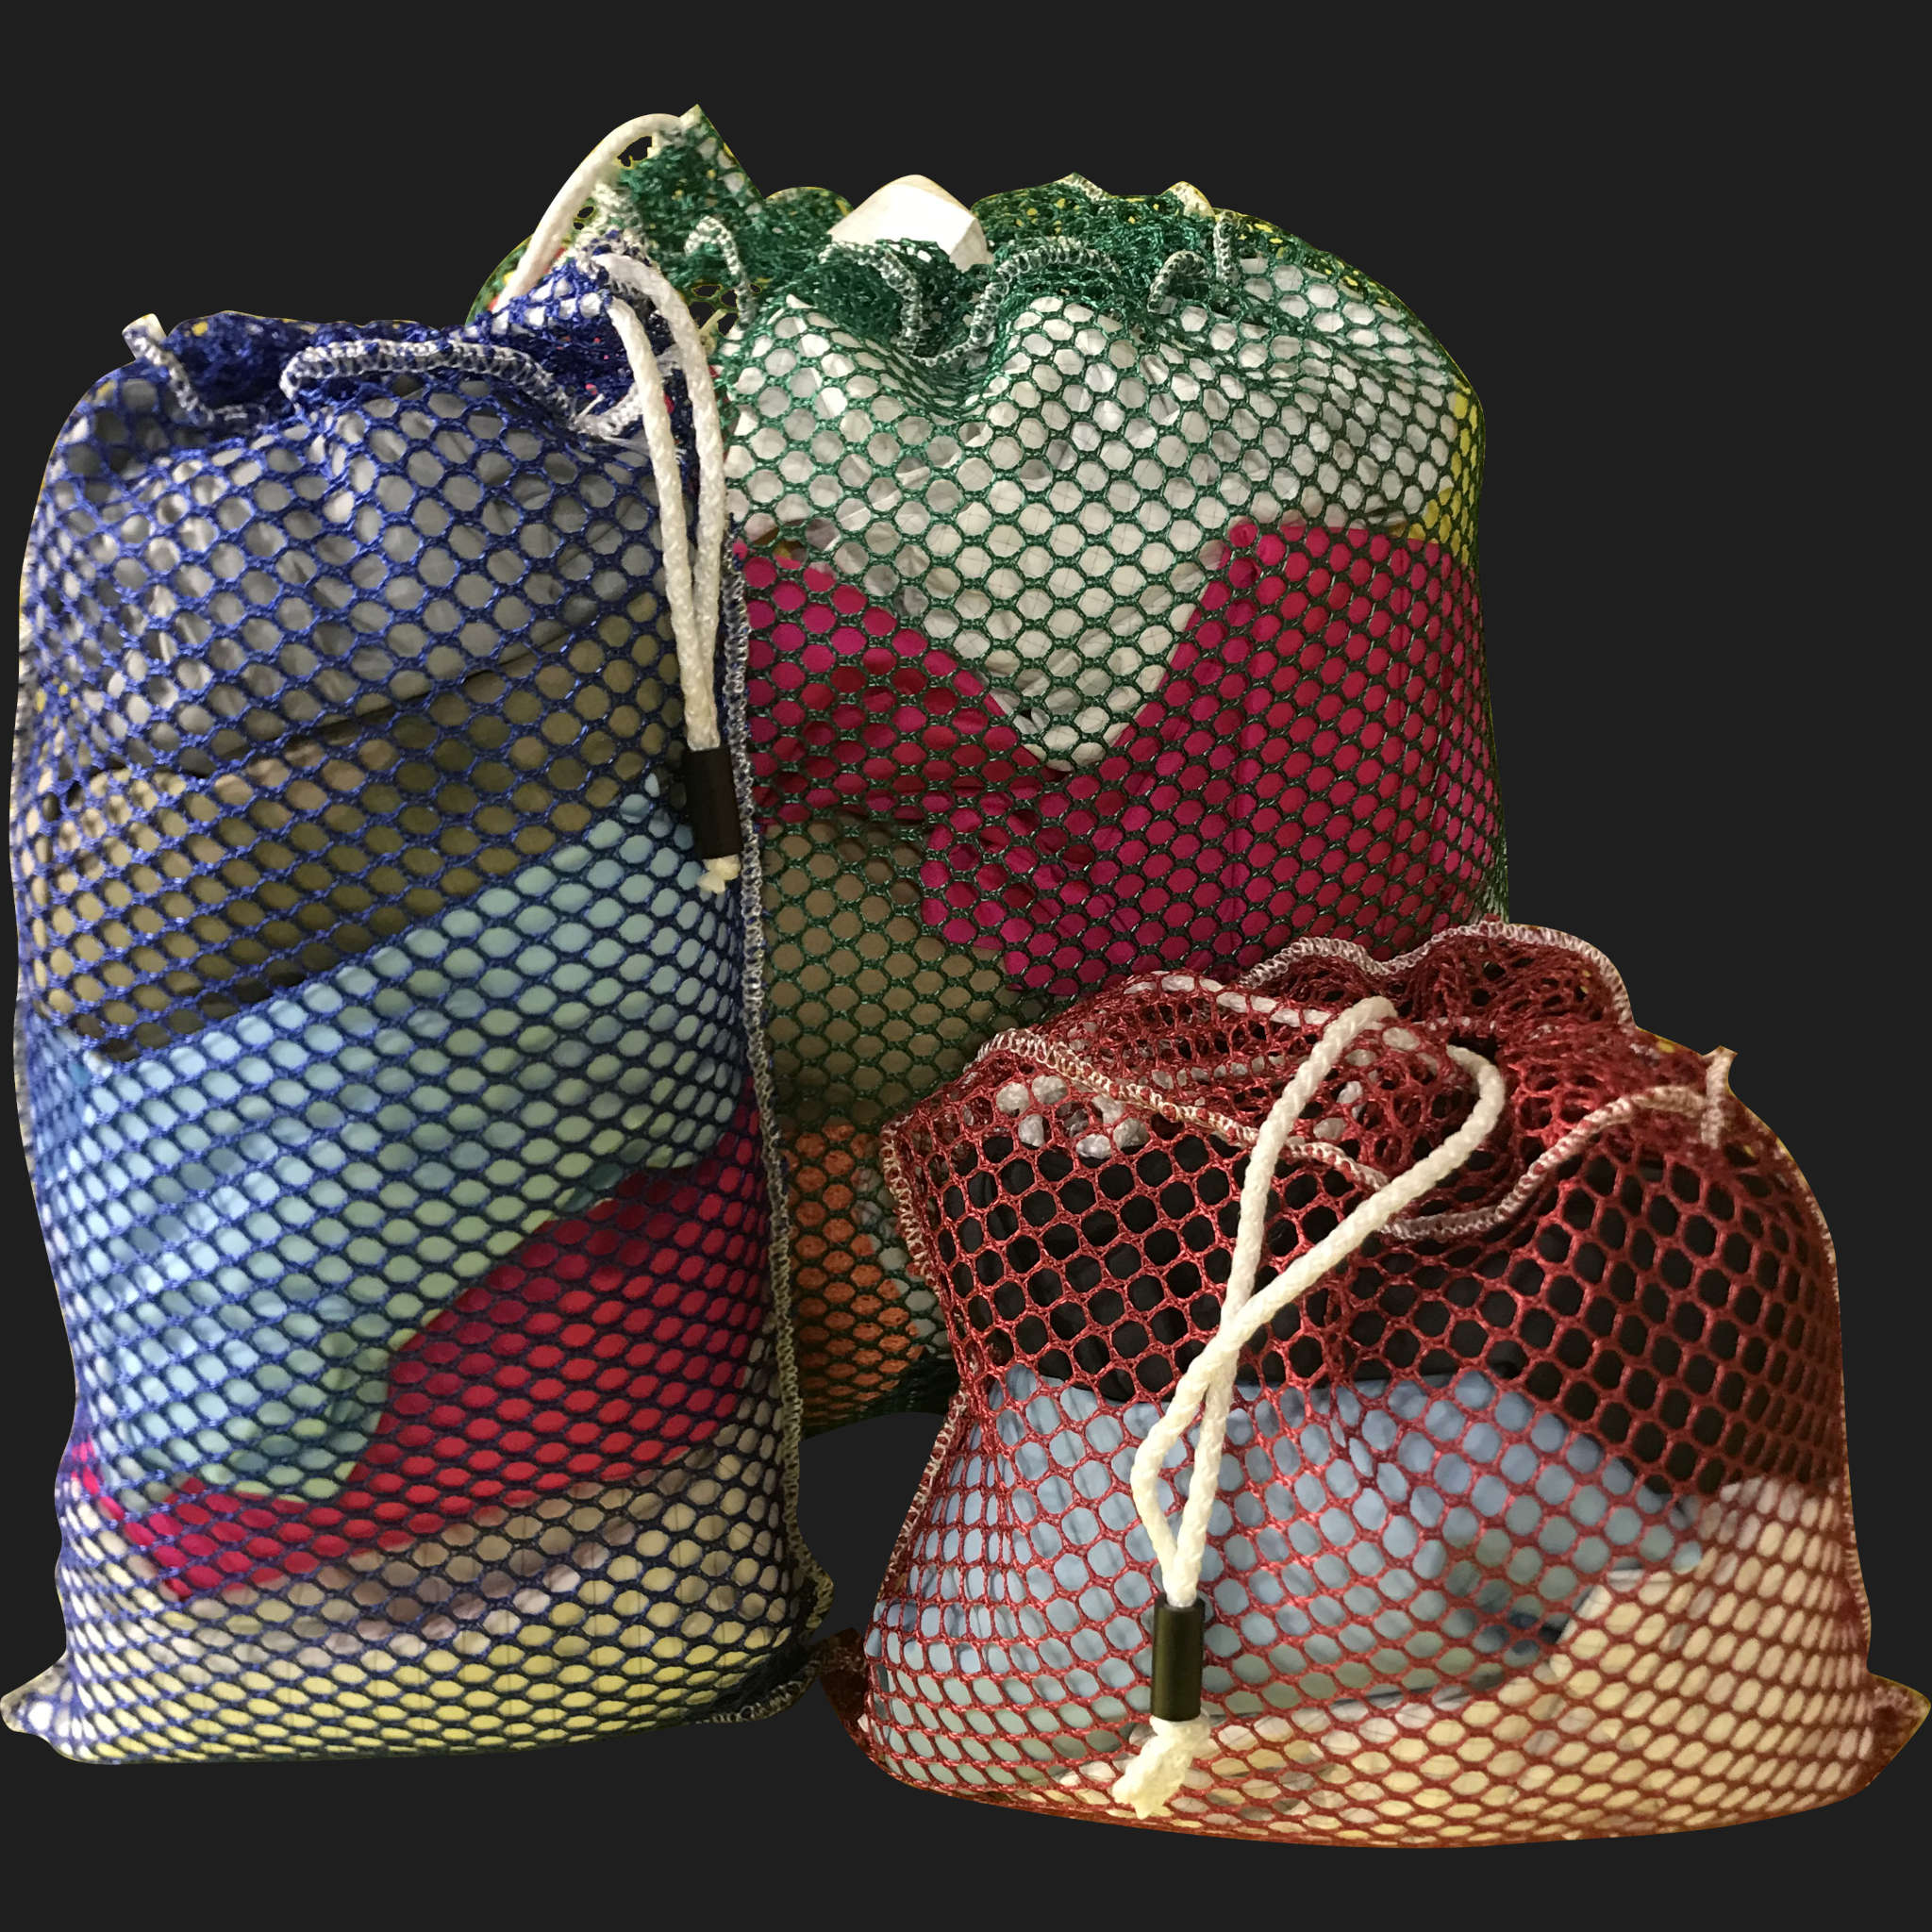 18" x 30" Customized Mesh-Net-Laundry Bags Heavy Duty with Cord and barrellock closure